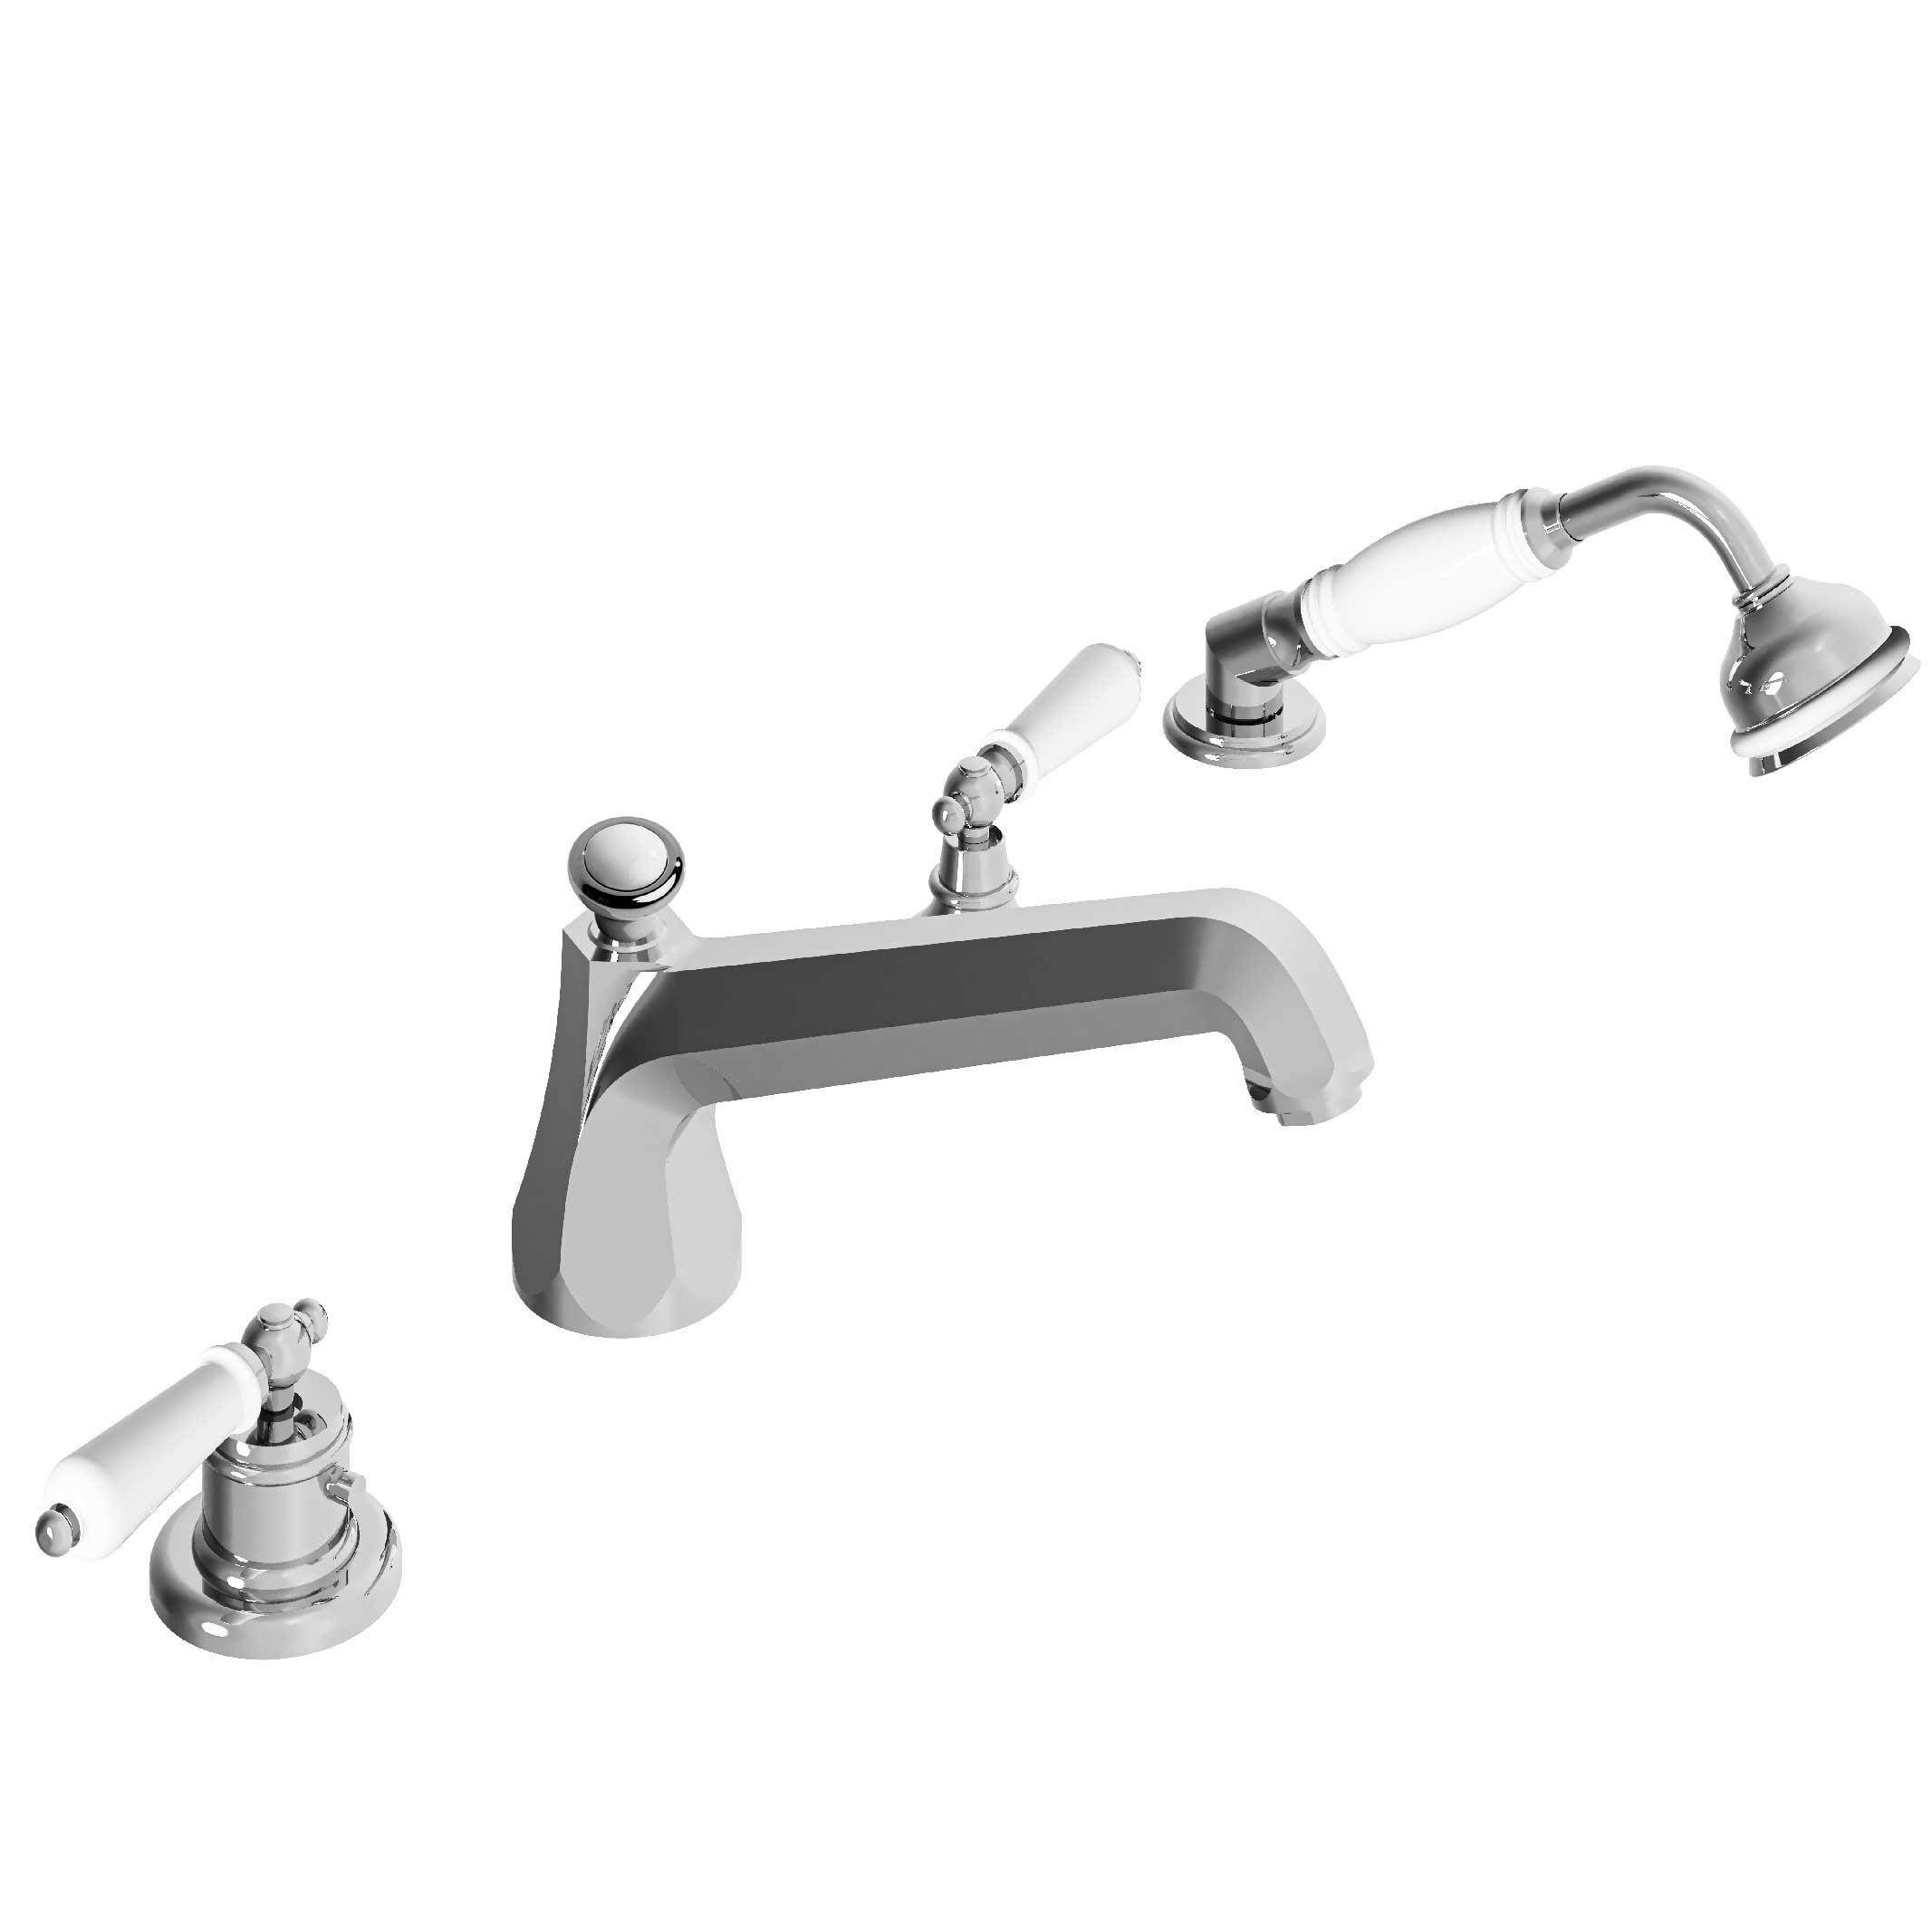 M32-3304TXL XL 4-hole bath and shower thermo. mixer